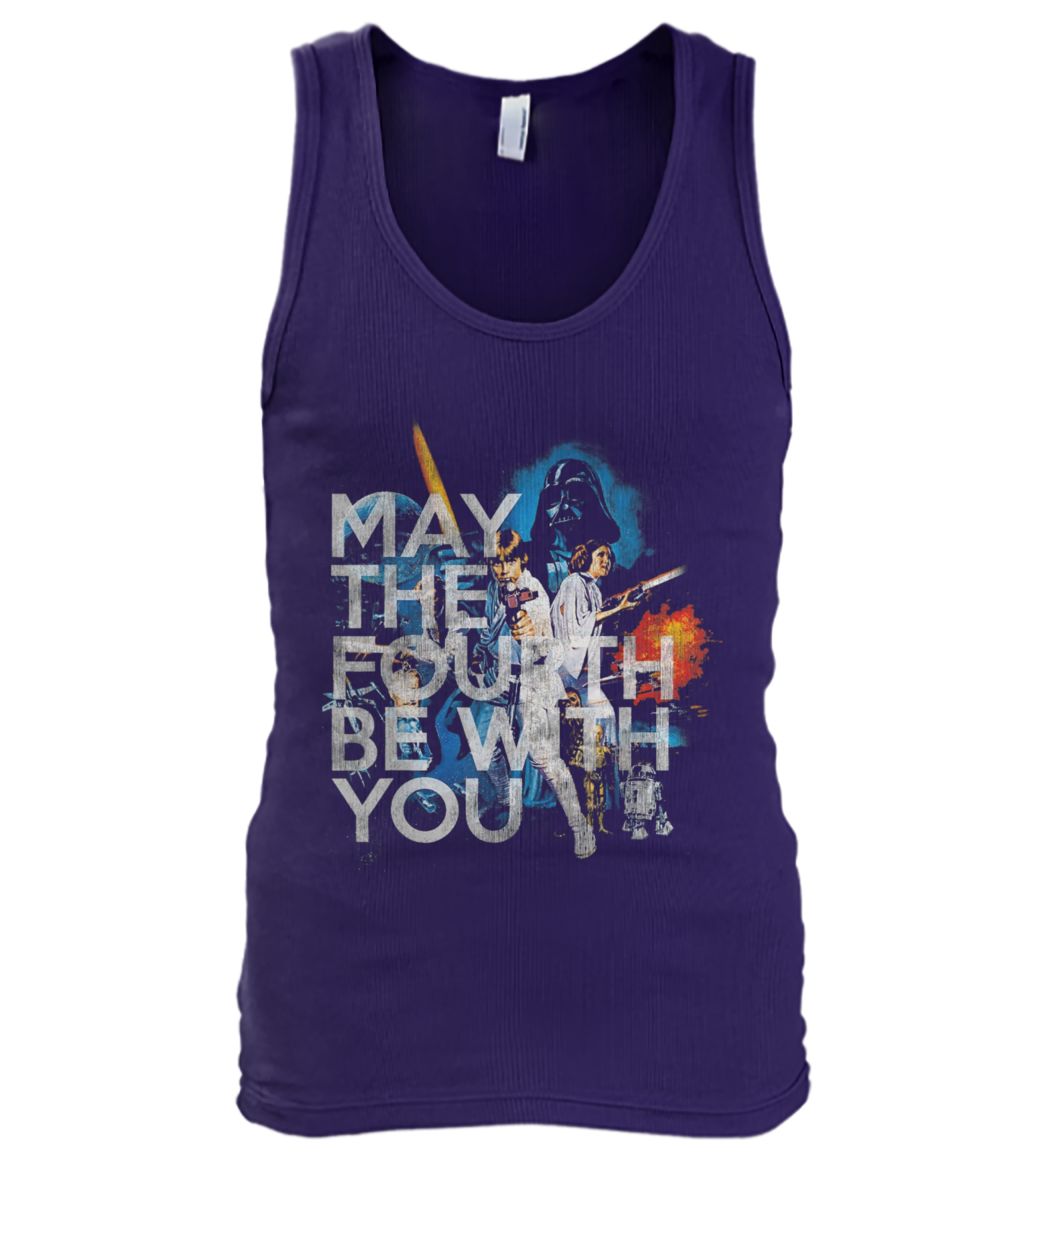 May the fourth be with you star wars day men's tank top